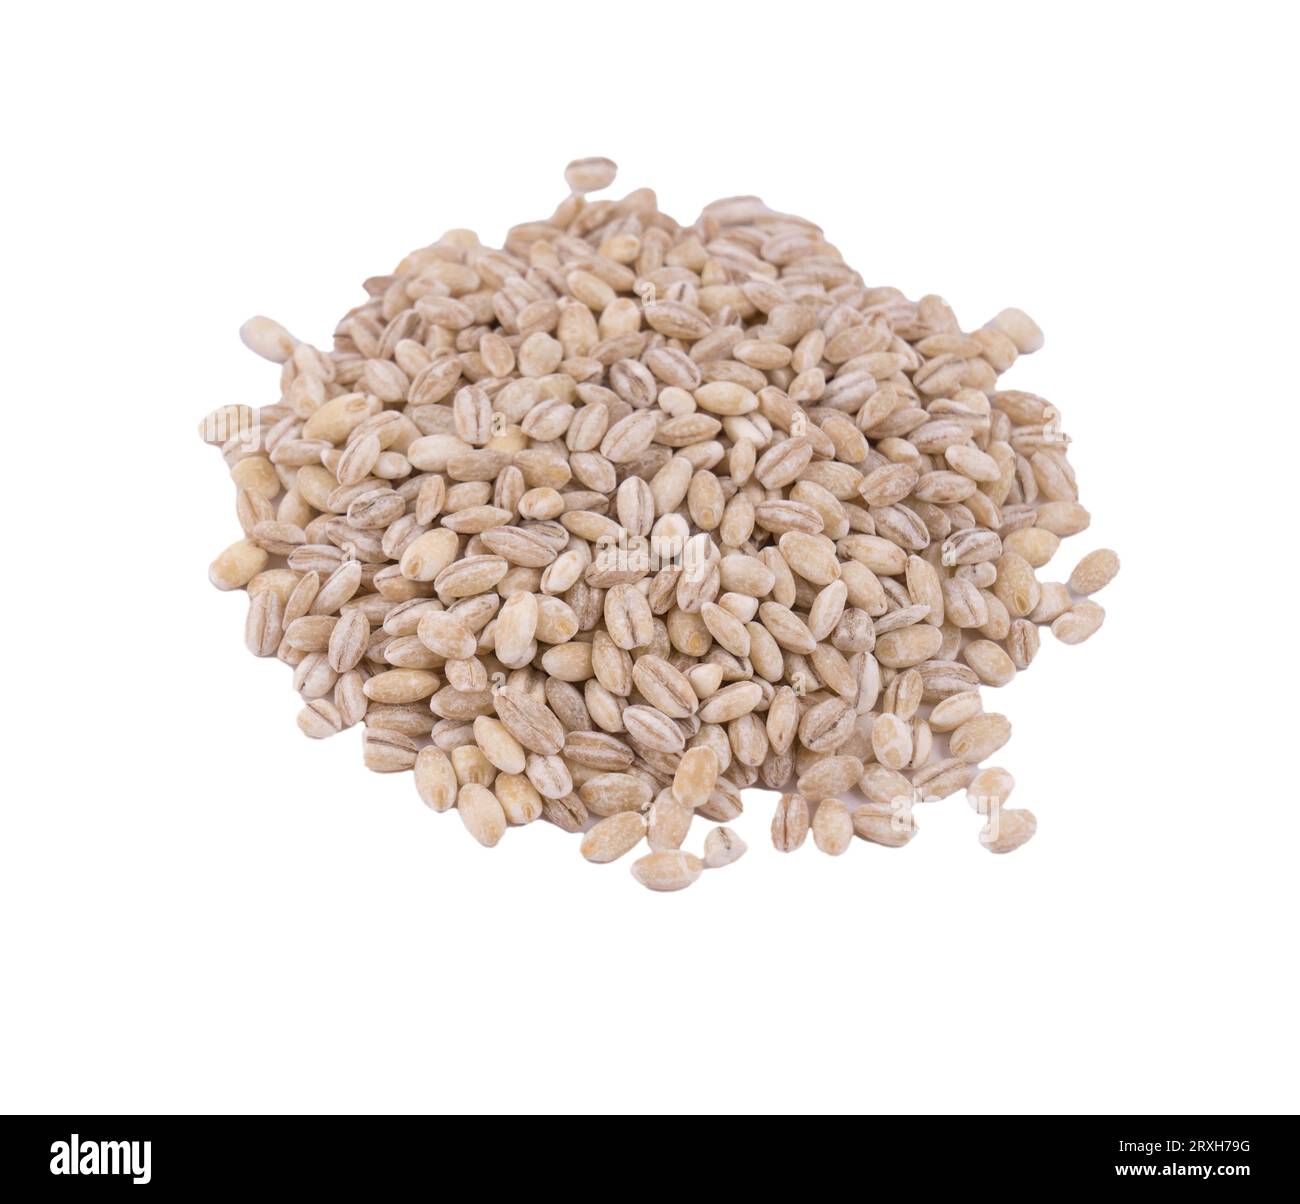 a small pile of barley grains on a transparent background Stock Photo